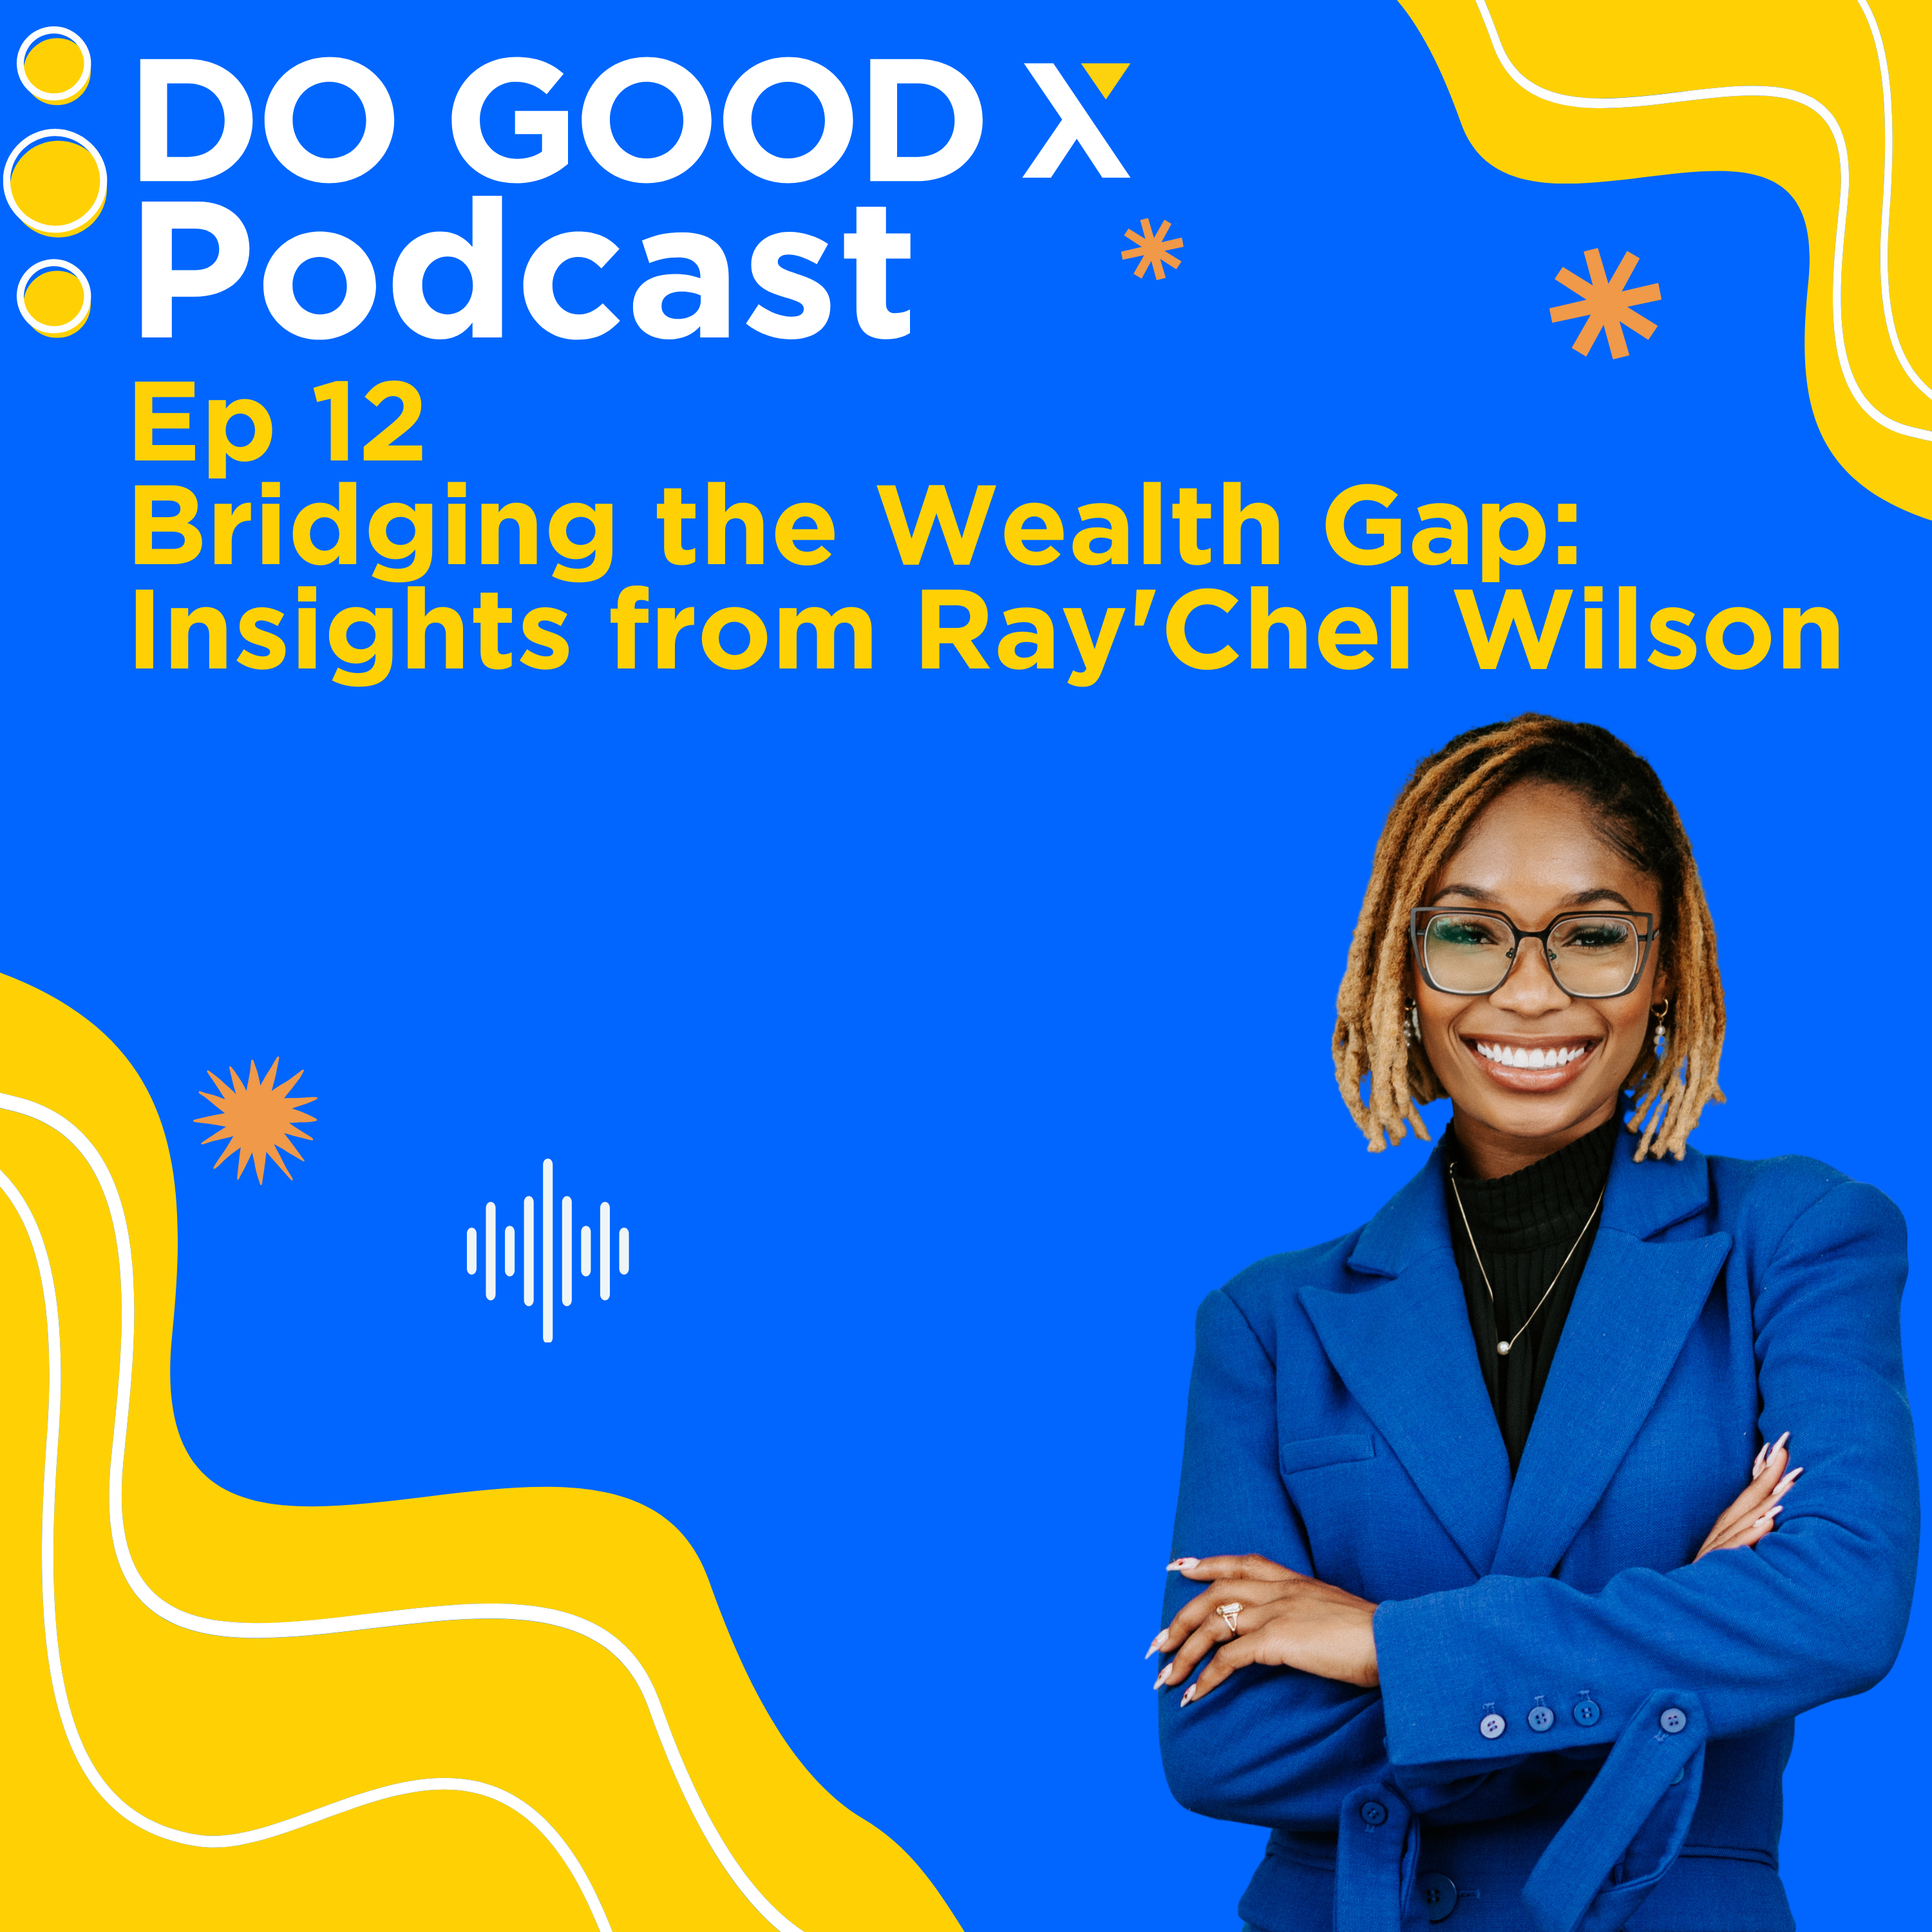 Ep. 12 Bridging the Wealth Gap: Insights from Ray’Chel Wilson